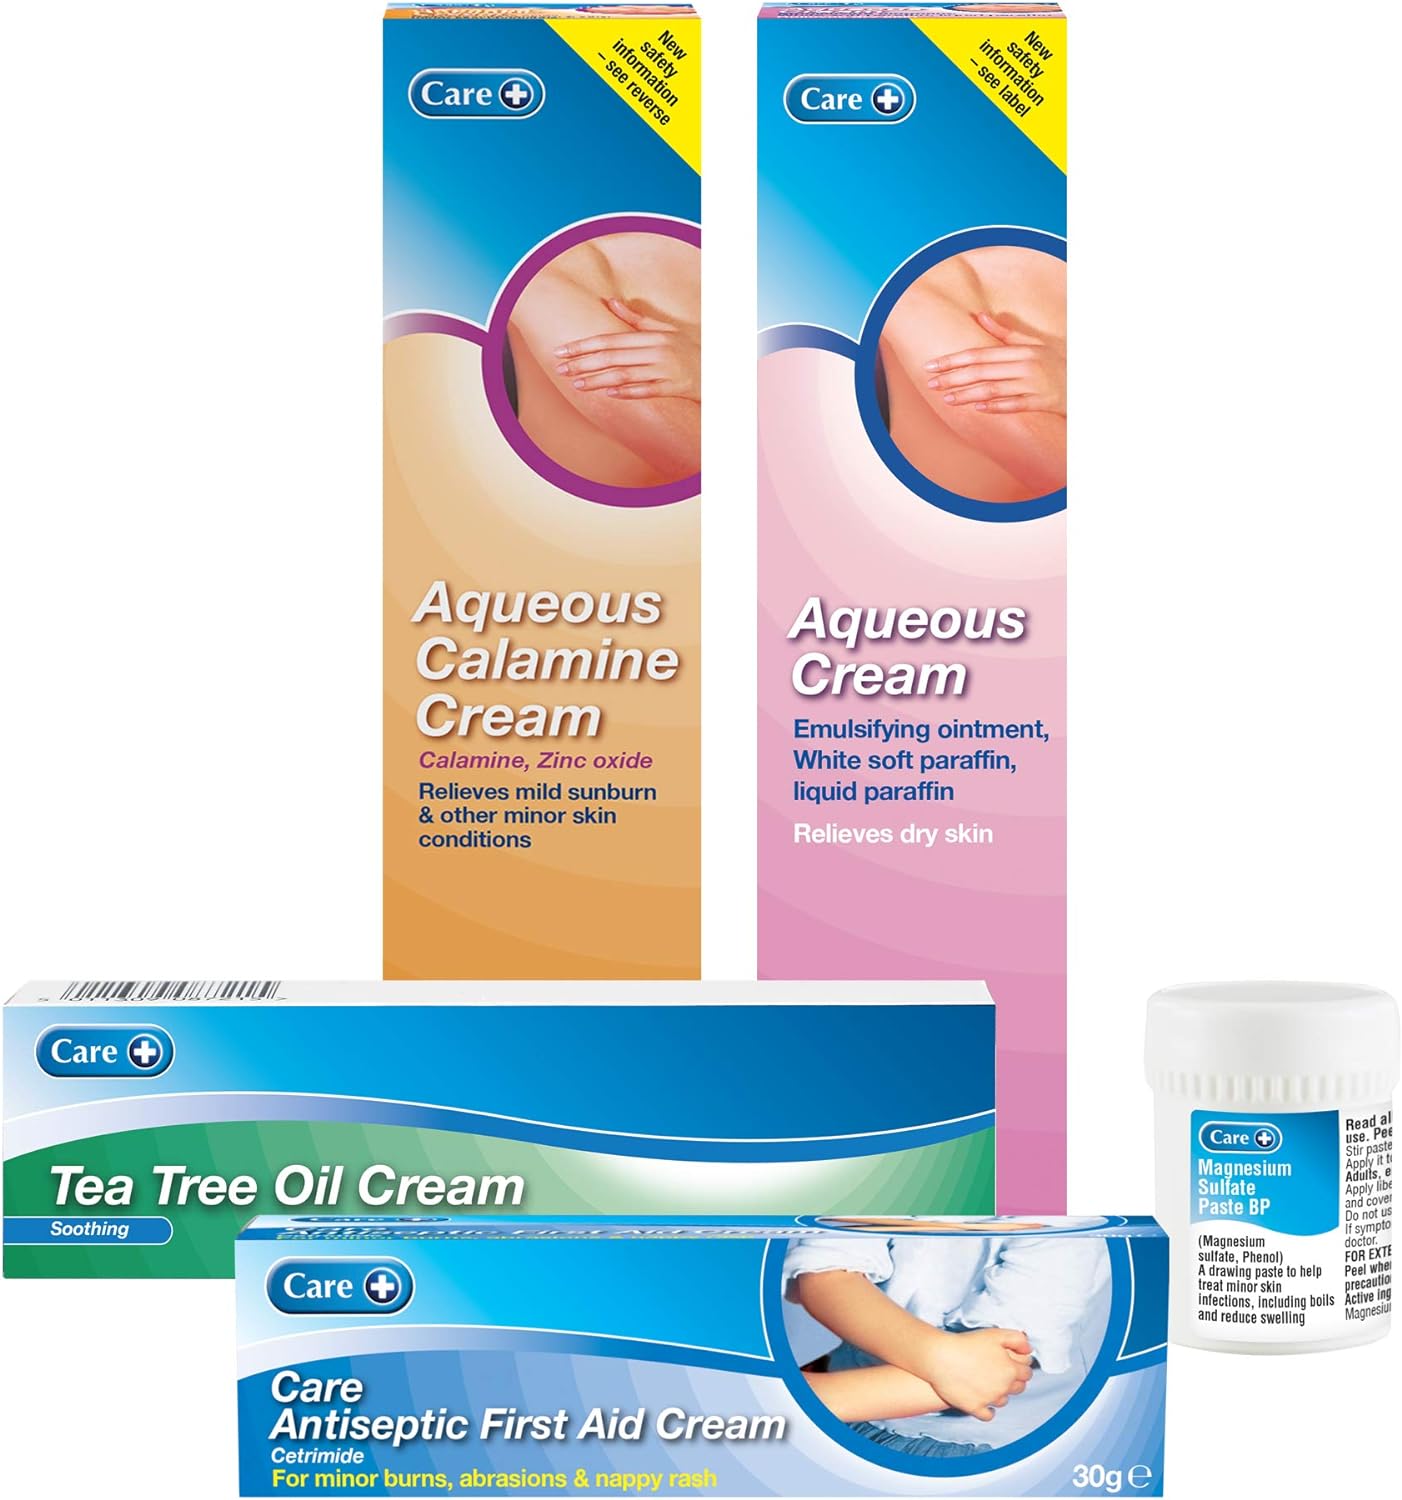 Care Aqueous Calamine Cream 100g, Relieves Mild Sunburn and other Minor Skin Conditions : Amazon.co.uk: Beauty